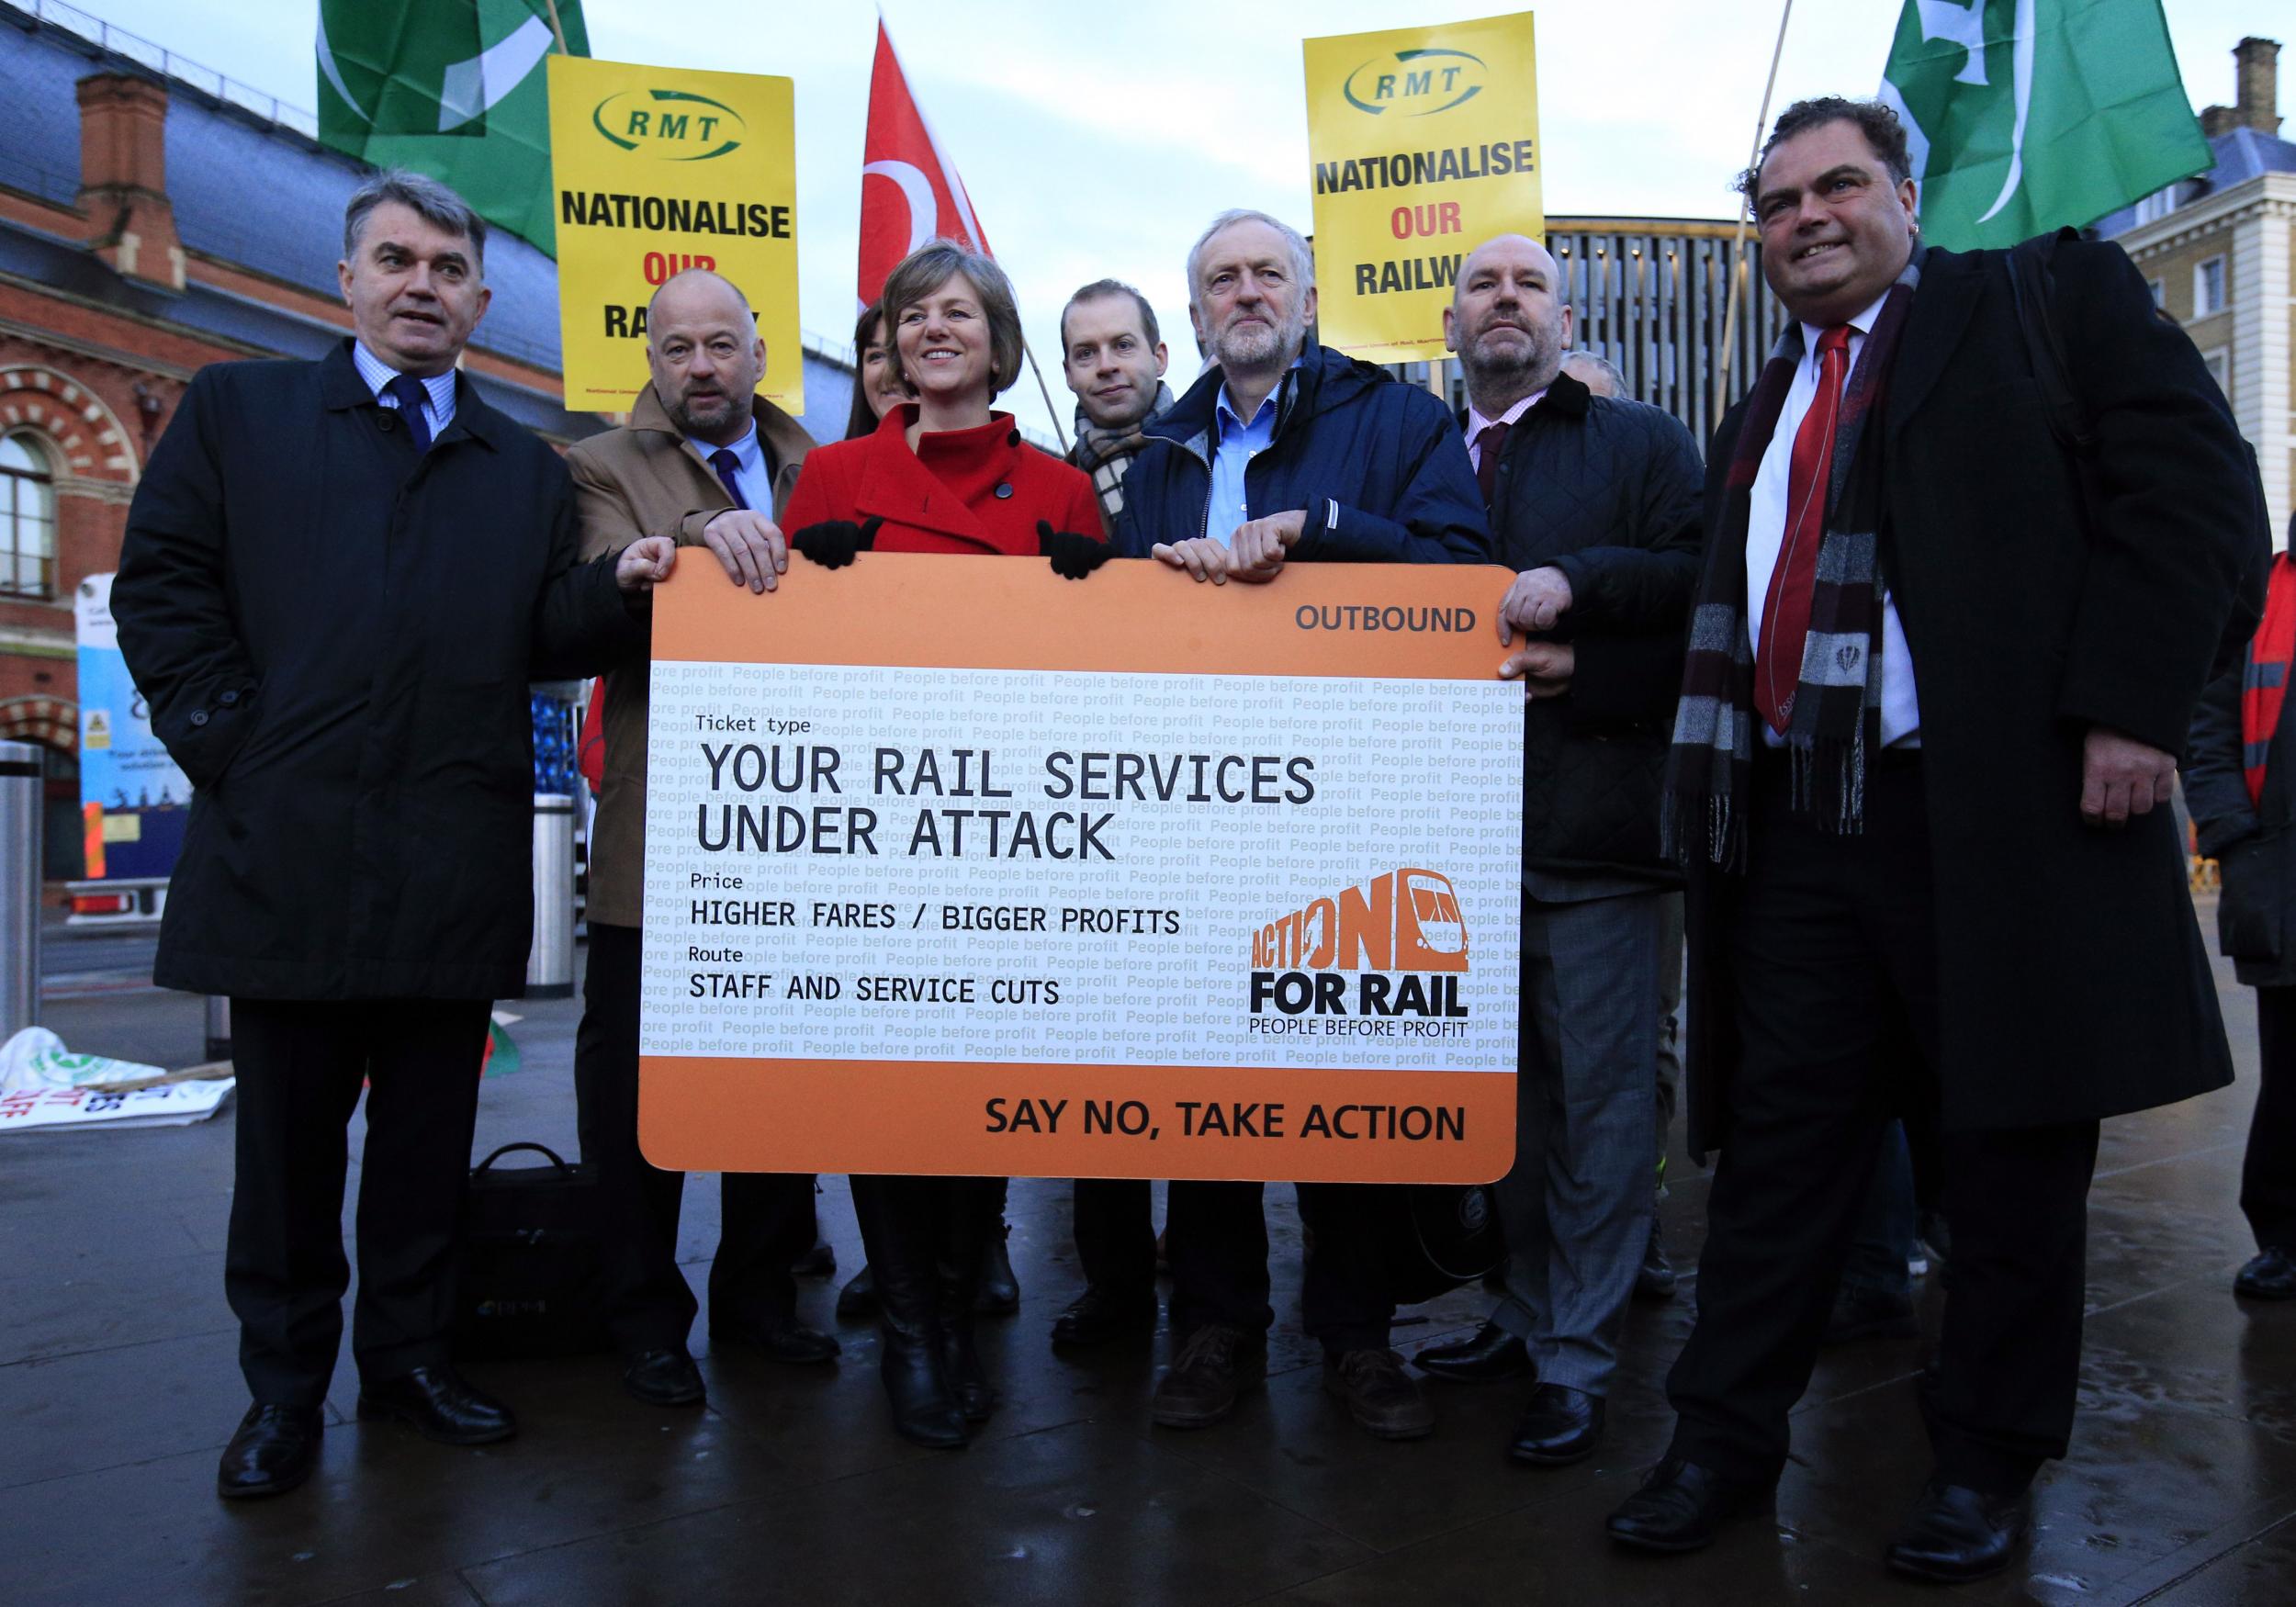 Jeremy Corbyn flanked by Shadow Transport Secretary Lillian Greenwood at the Rail Rip Off campaign